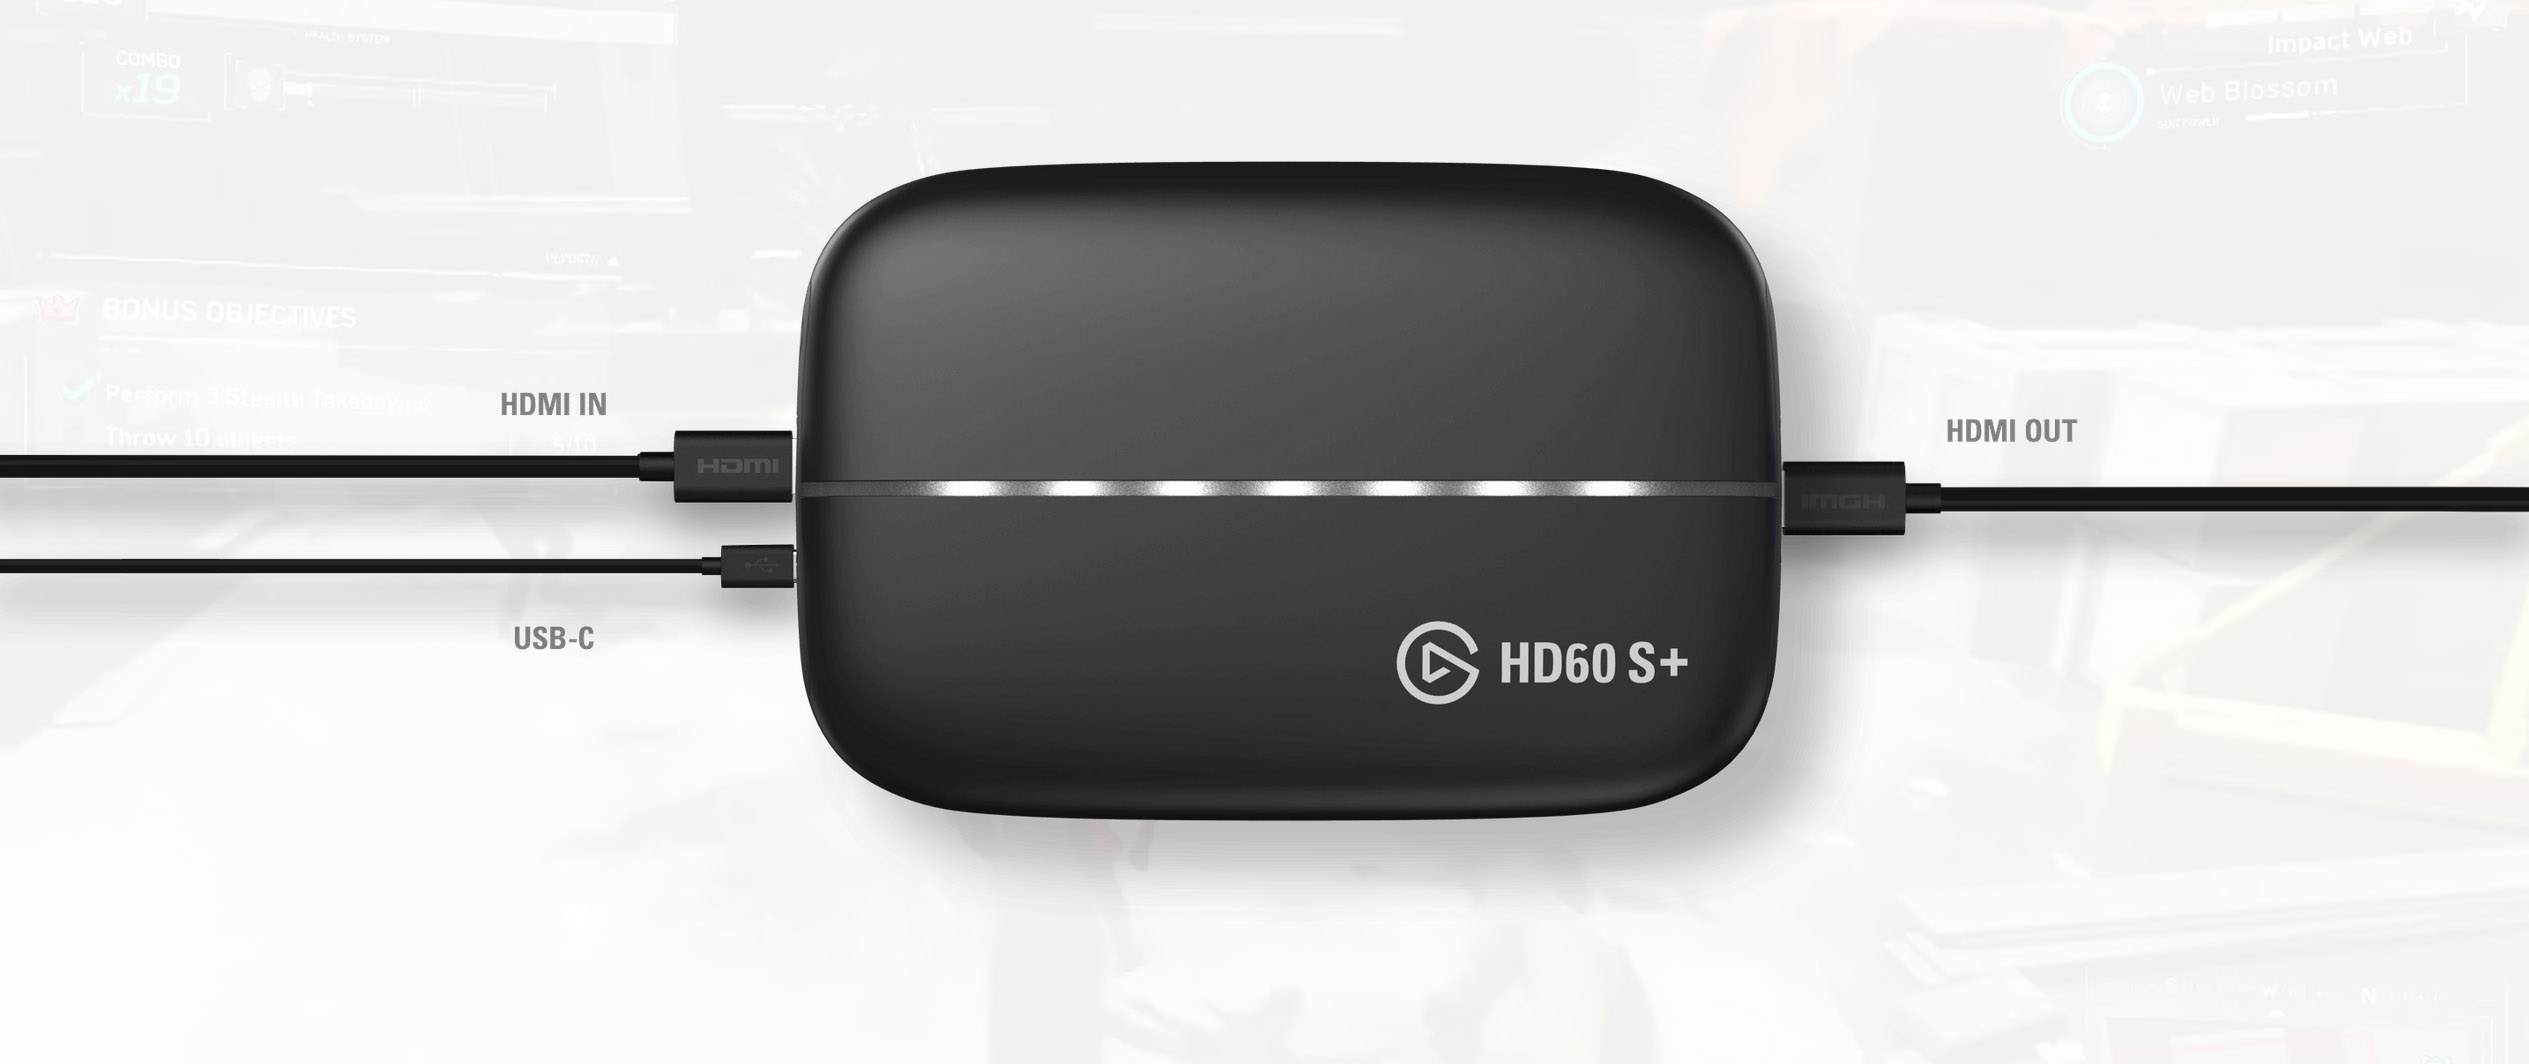 REFURBISHED Elgato HD60 S+ Video Capture Card EASY CONNECTION, 1080p60  HDR10 840006609292